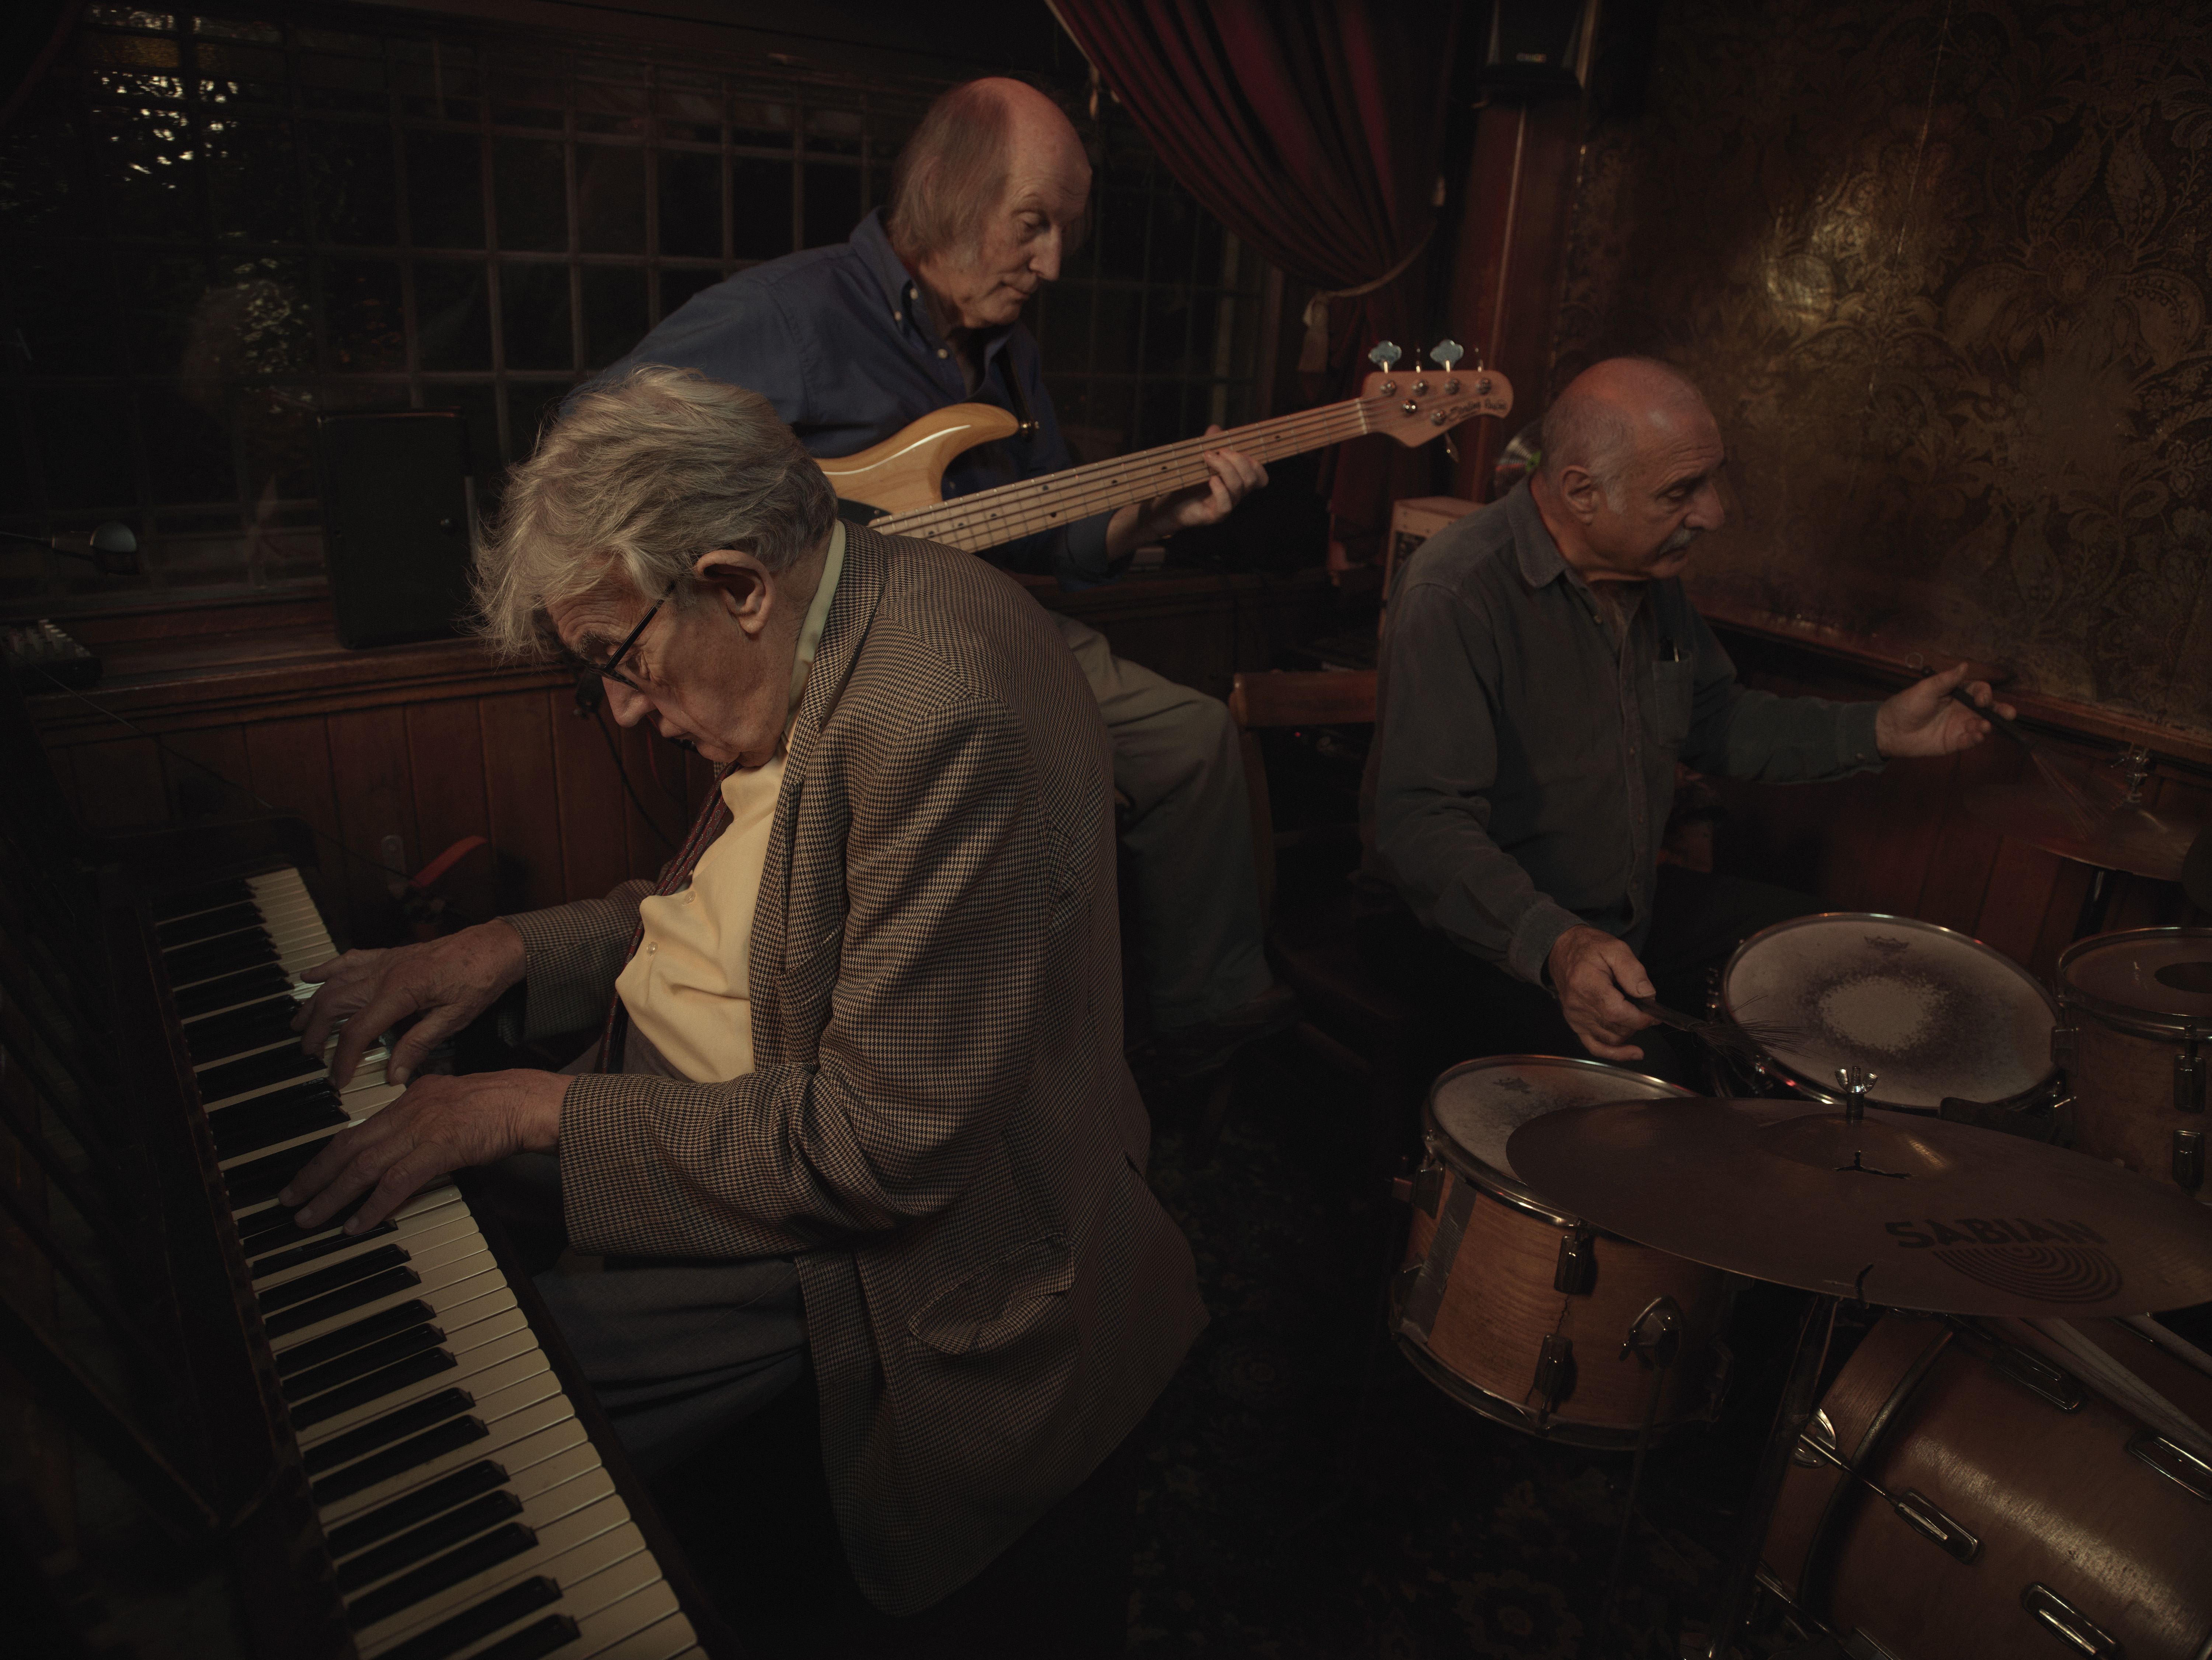 Band of crooners, piano in pub. Image from Last of the Old Crooners, Palm Tree pub by Tom Oldham